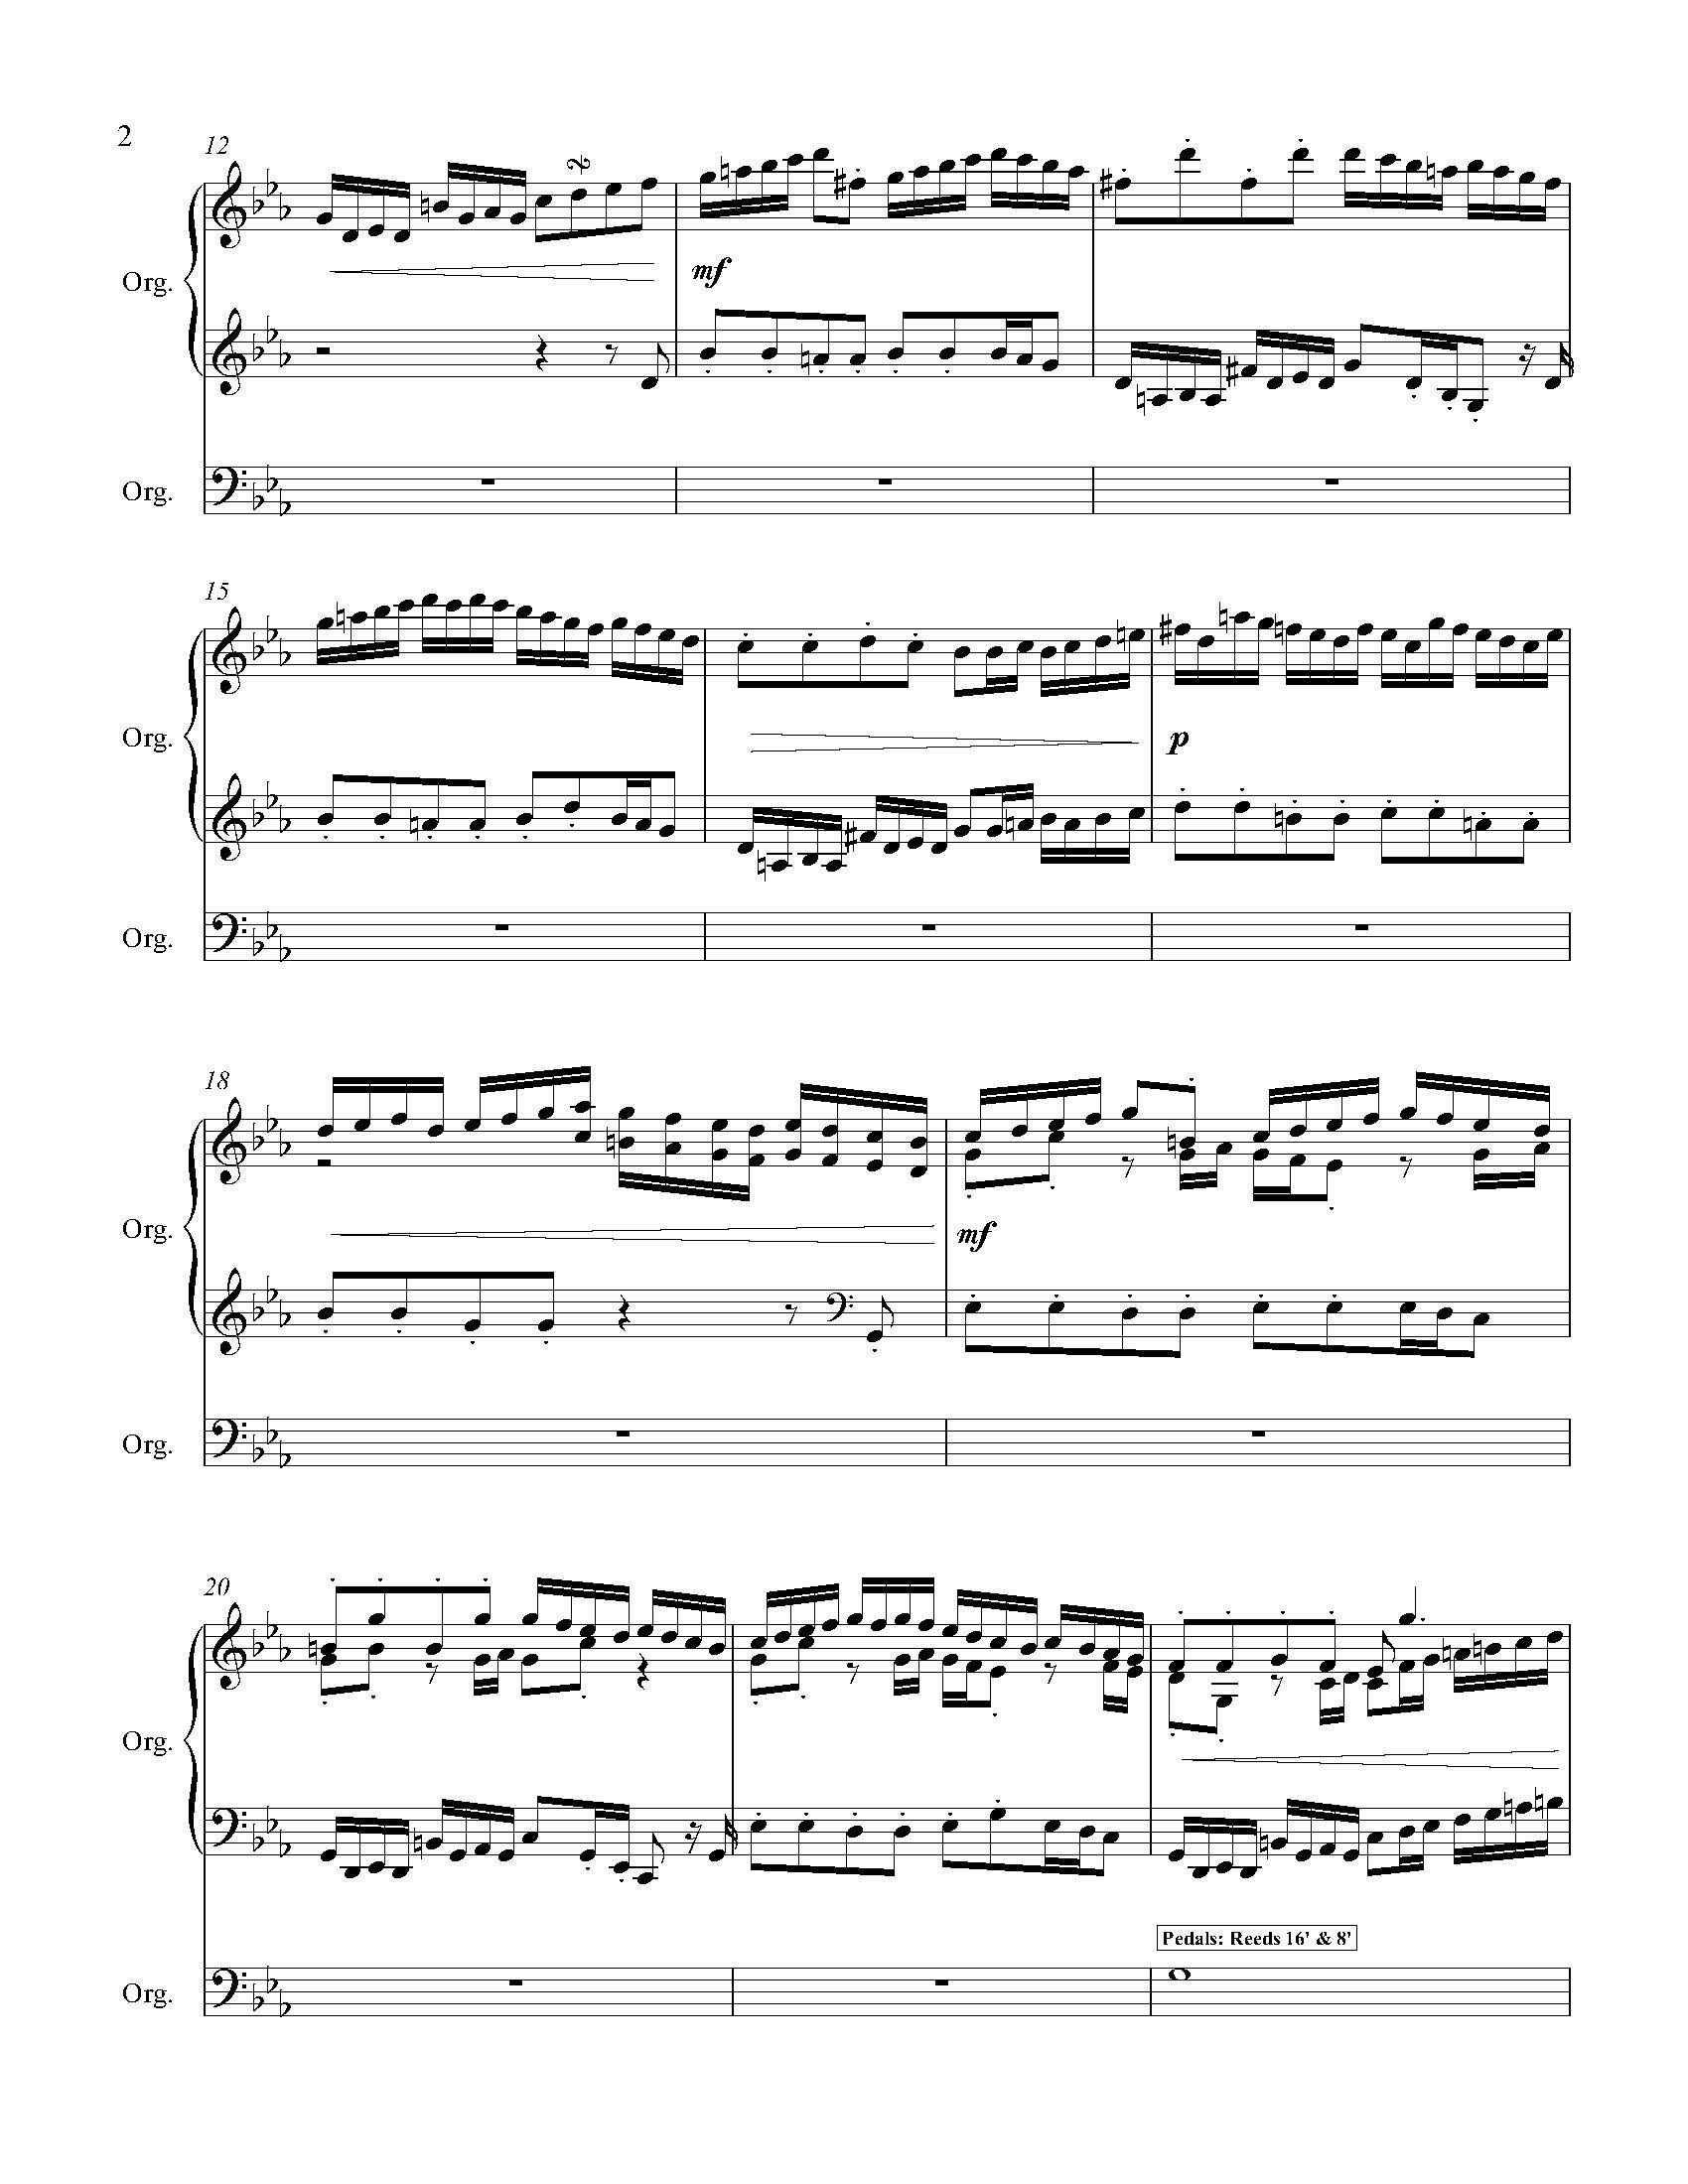 Baroque Fantasy on Go Down Moses - Complete Score_Page_08.jpg